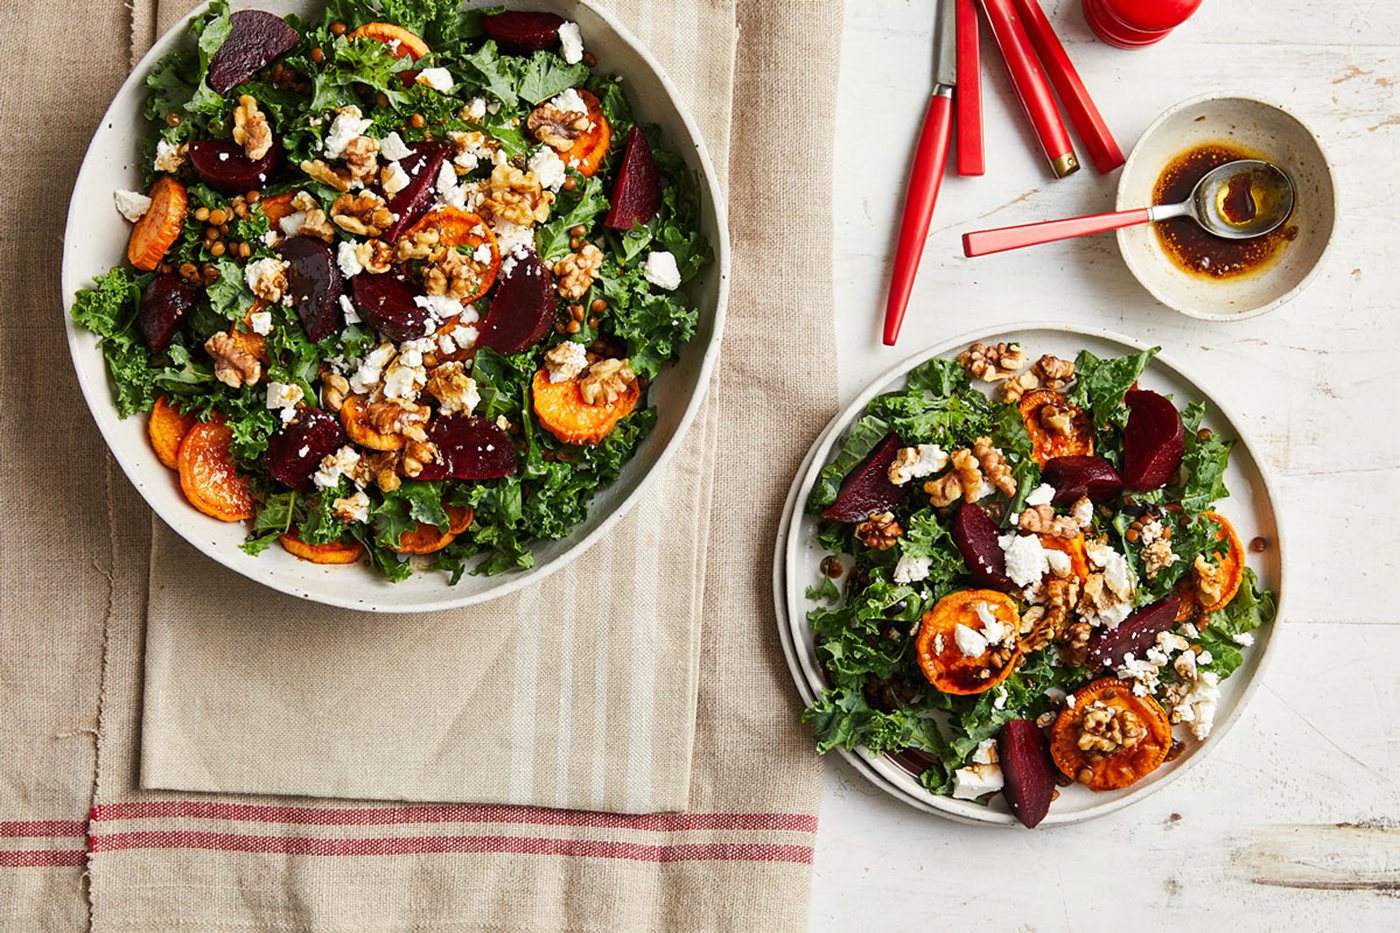  A colorful salad featuring beets, carrots, and cheese